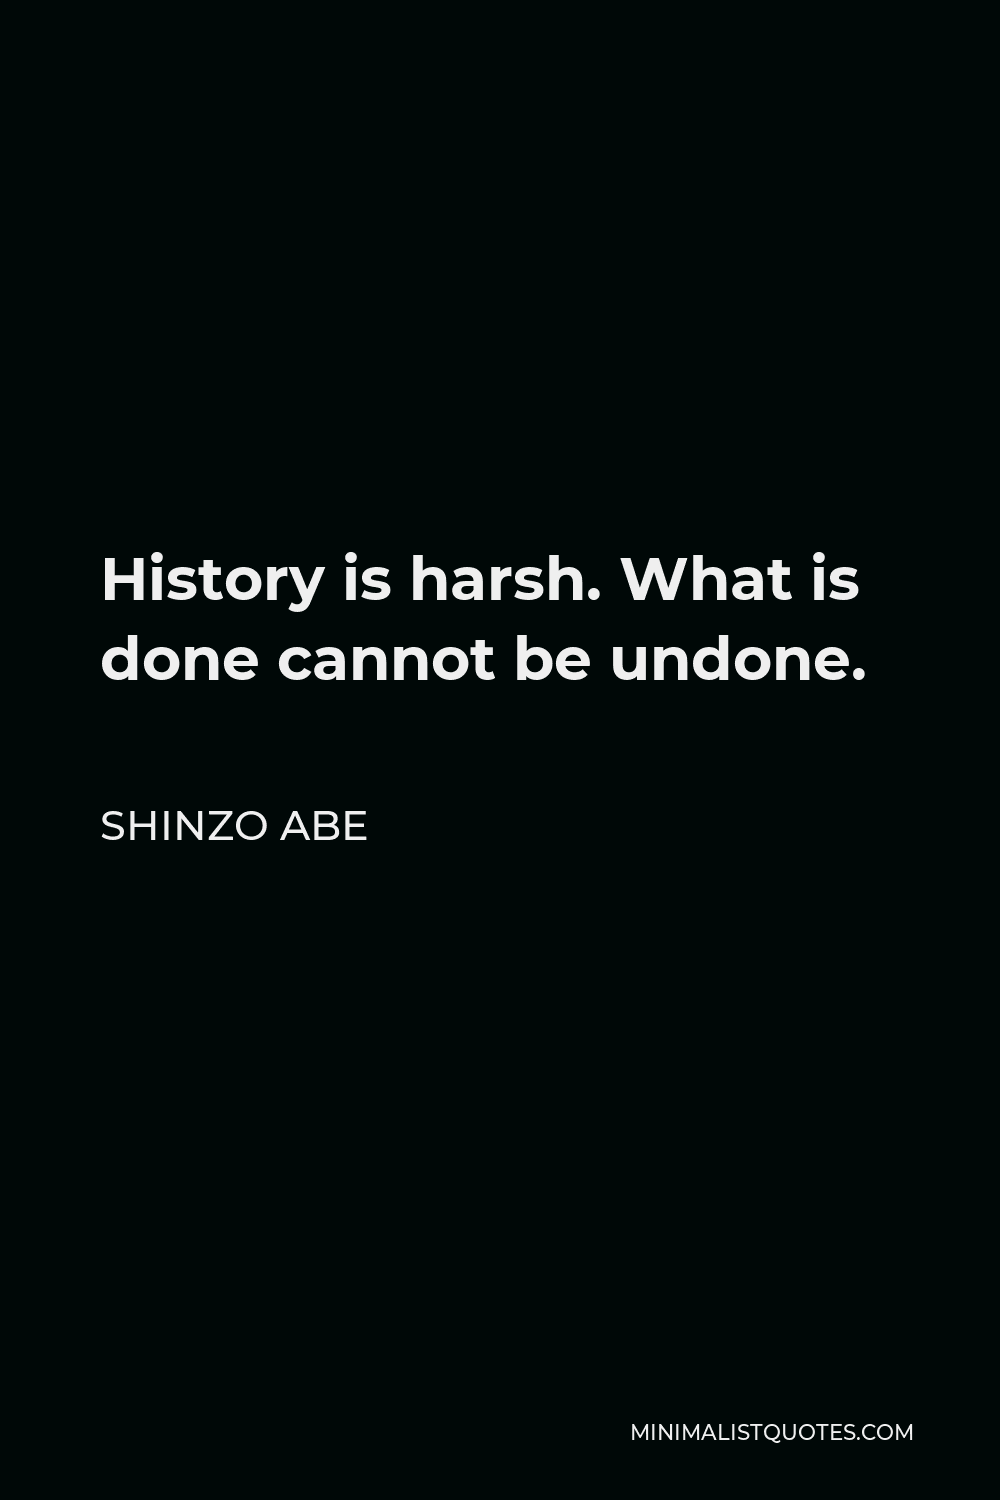 Shinzo Abe Quote - History is harsh. What is done cannot be undone.